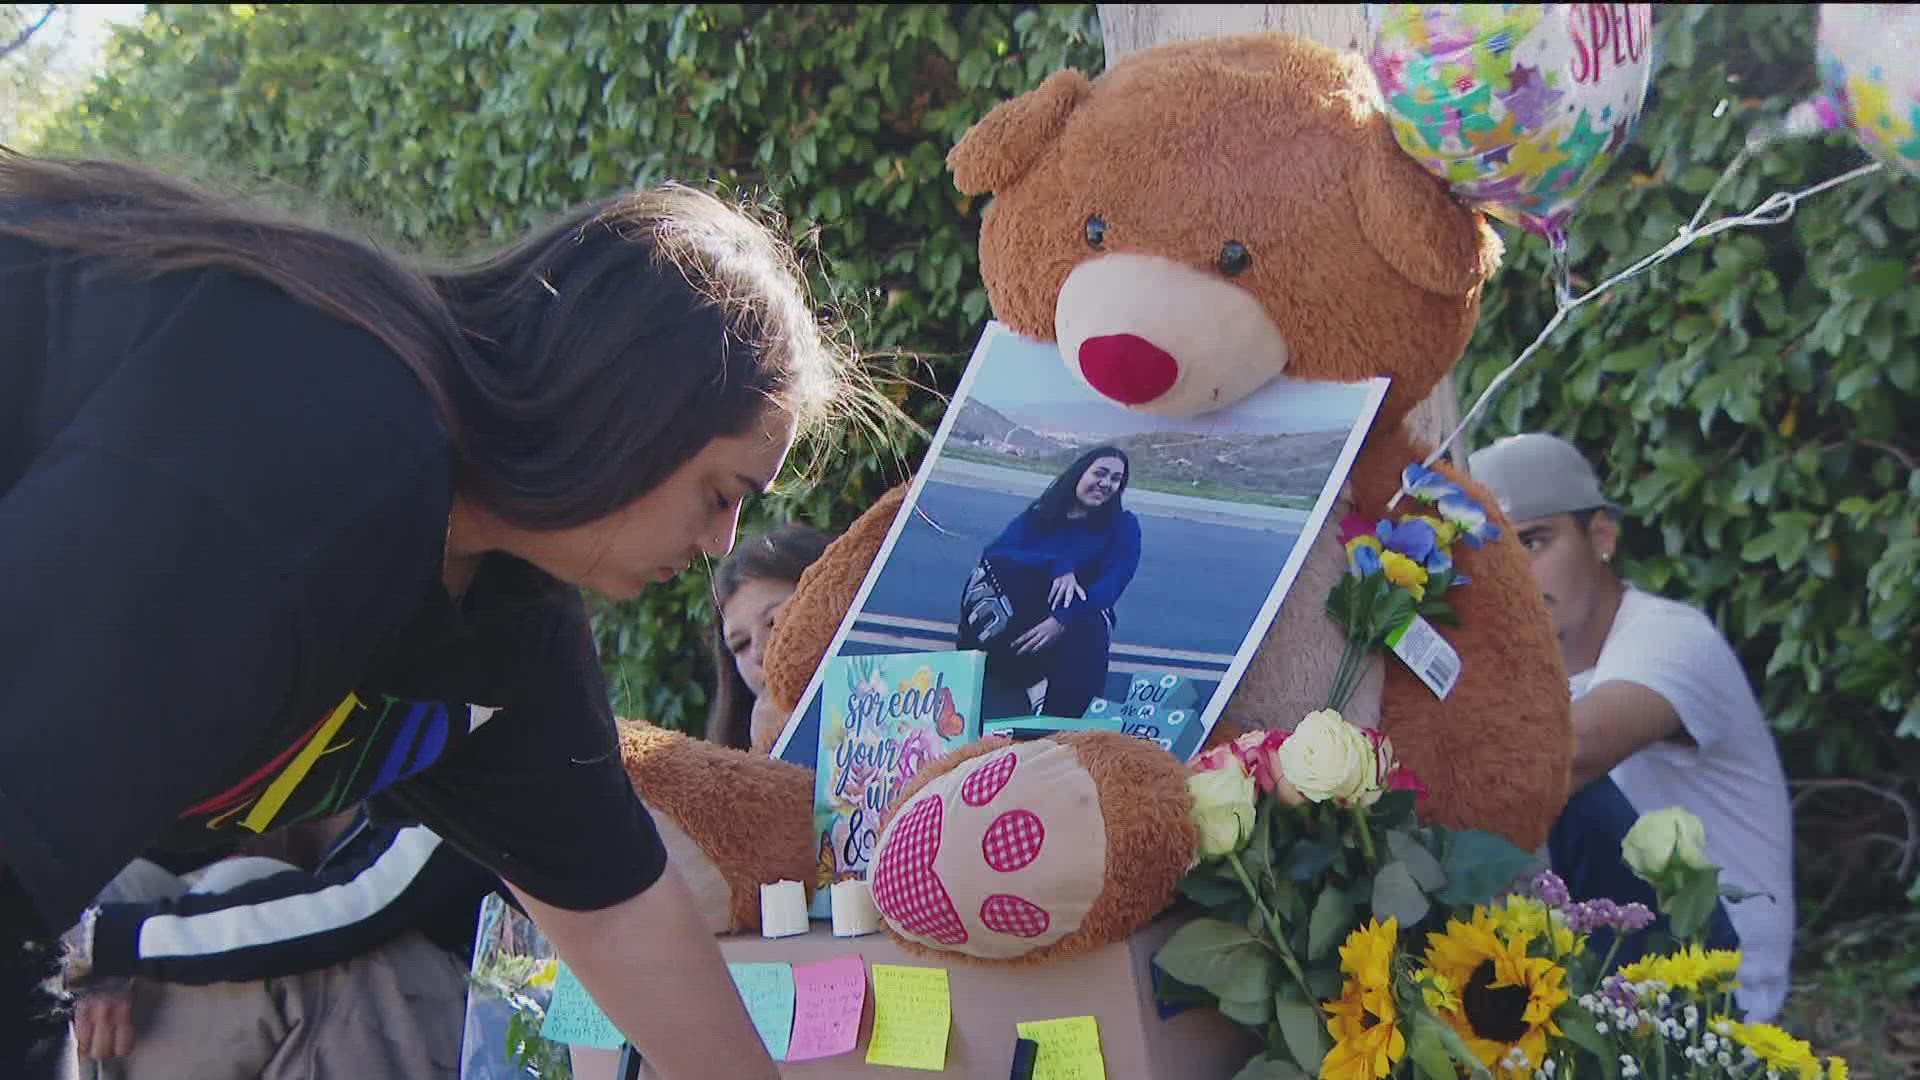 A 15-year-old girl and her stepfather were killed in the South Bay on Wednesday.